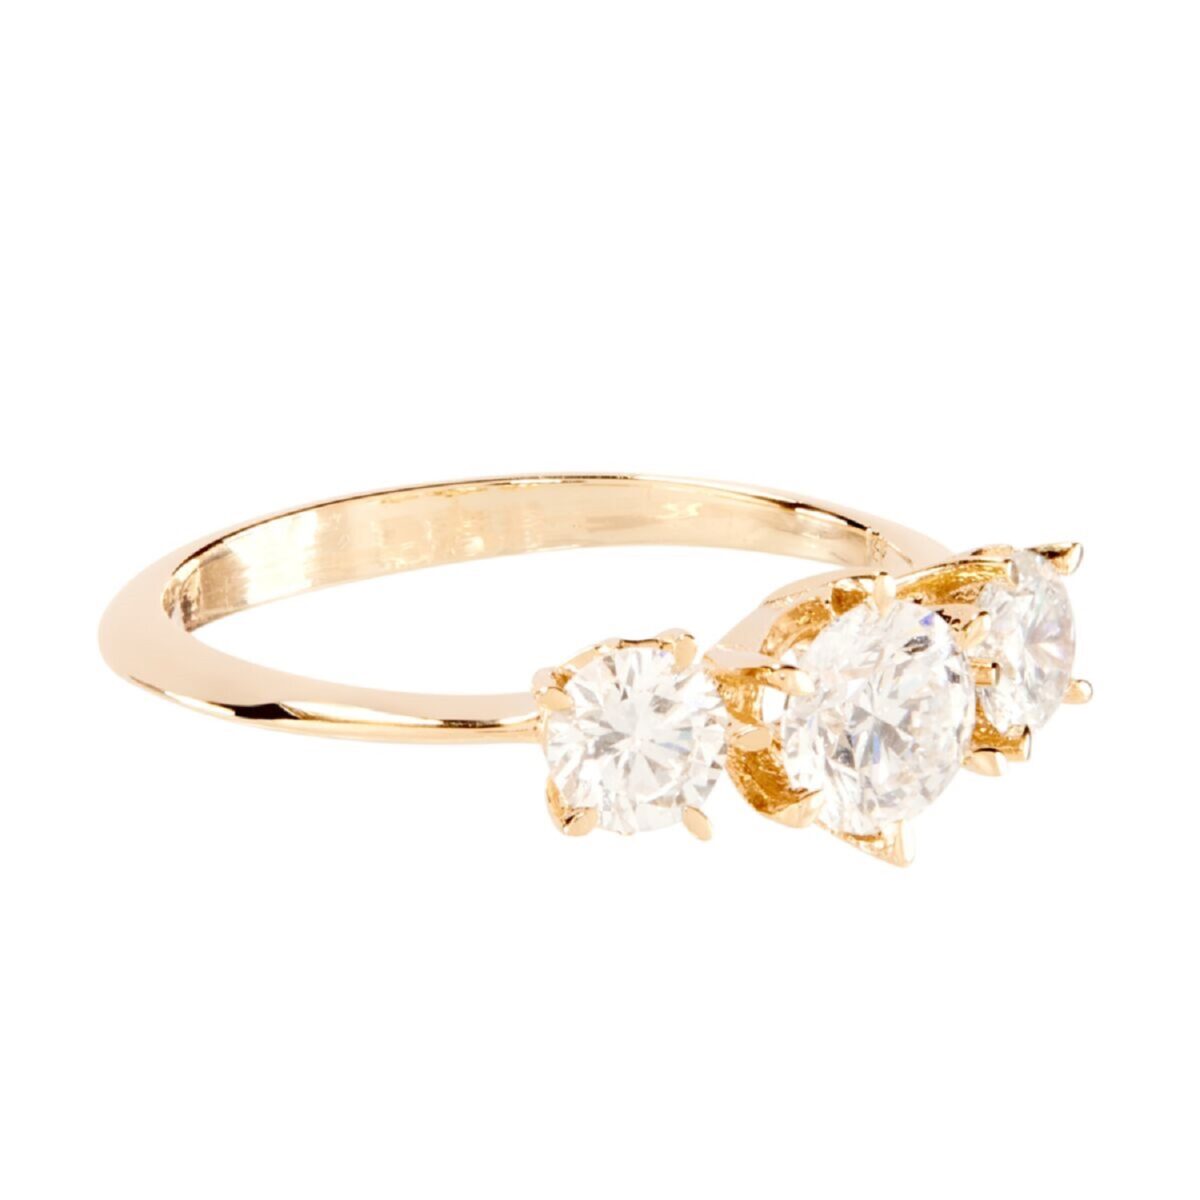 Trinity round cut lab grown diamond ring crafted in 14k yellow gold.